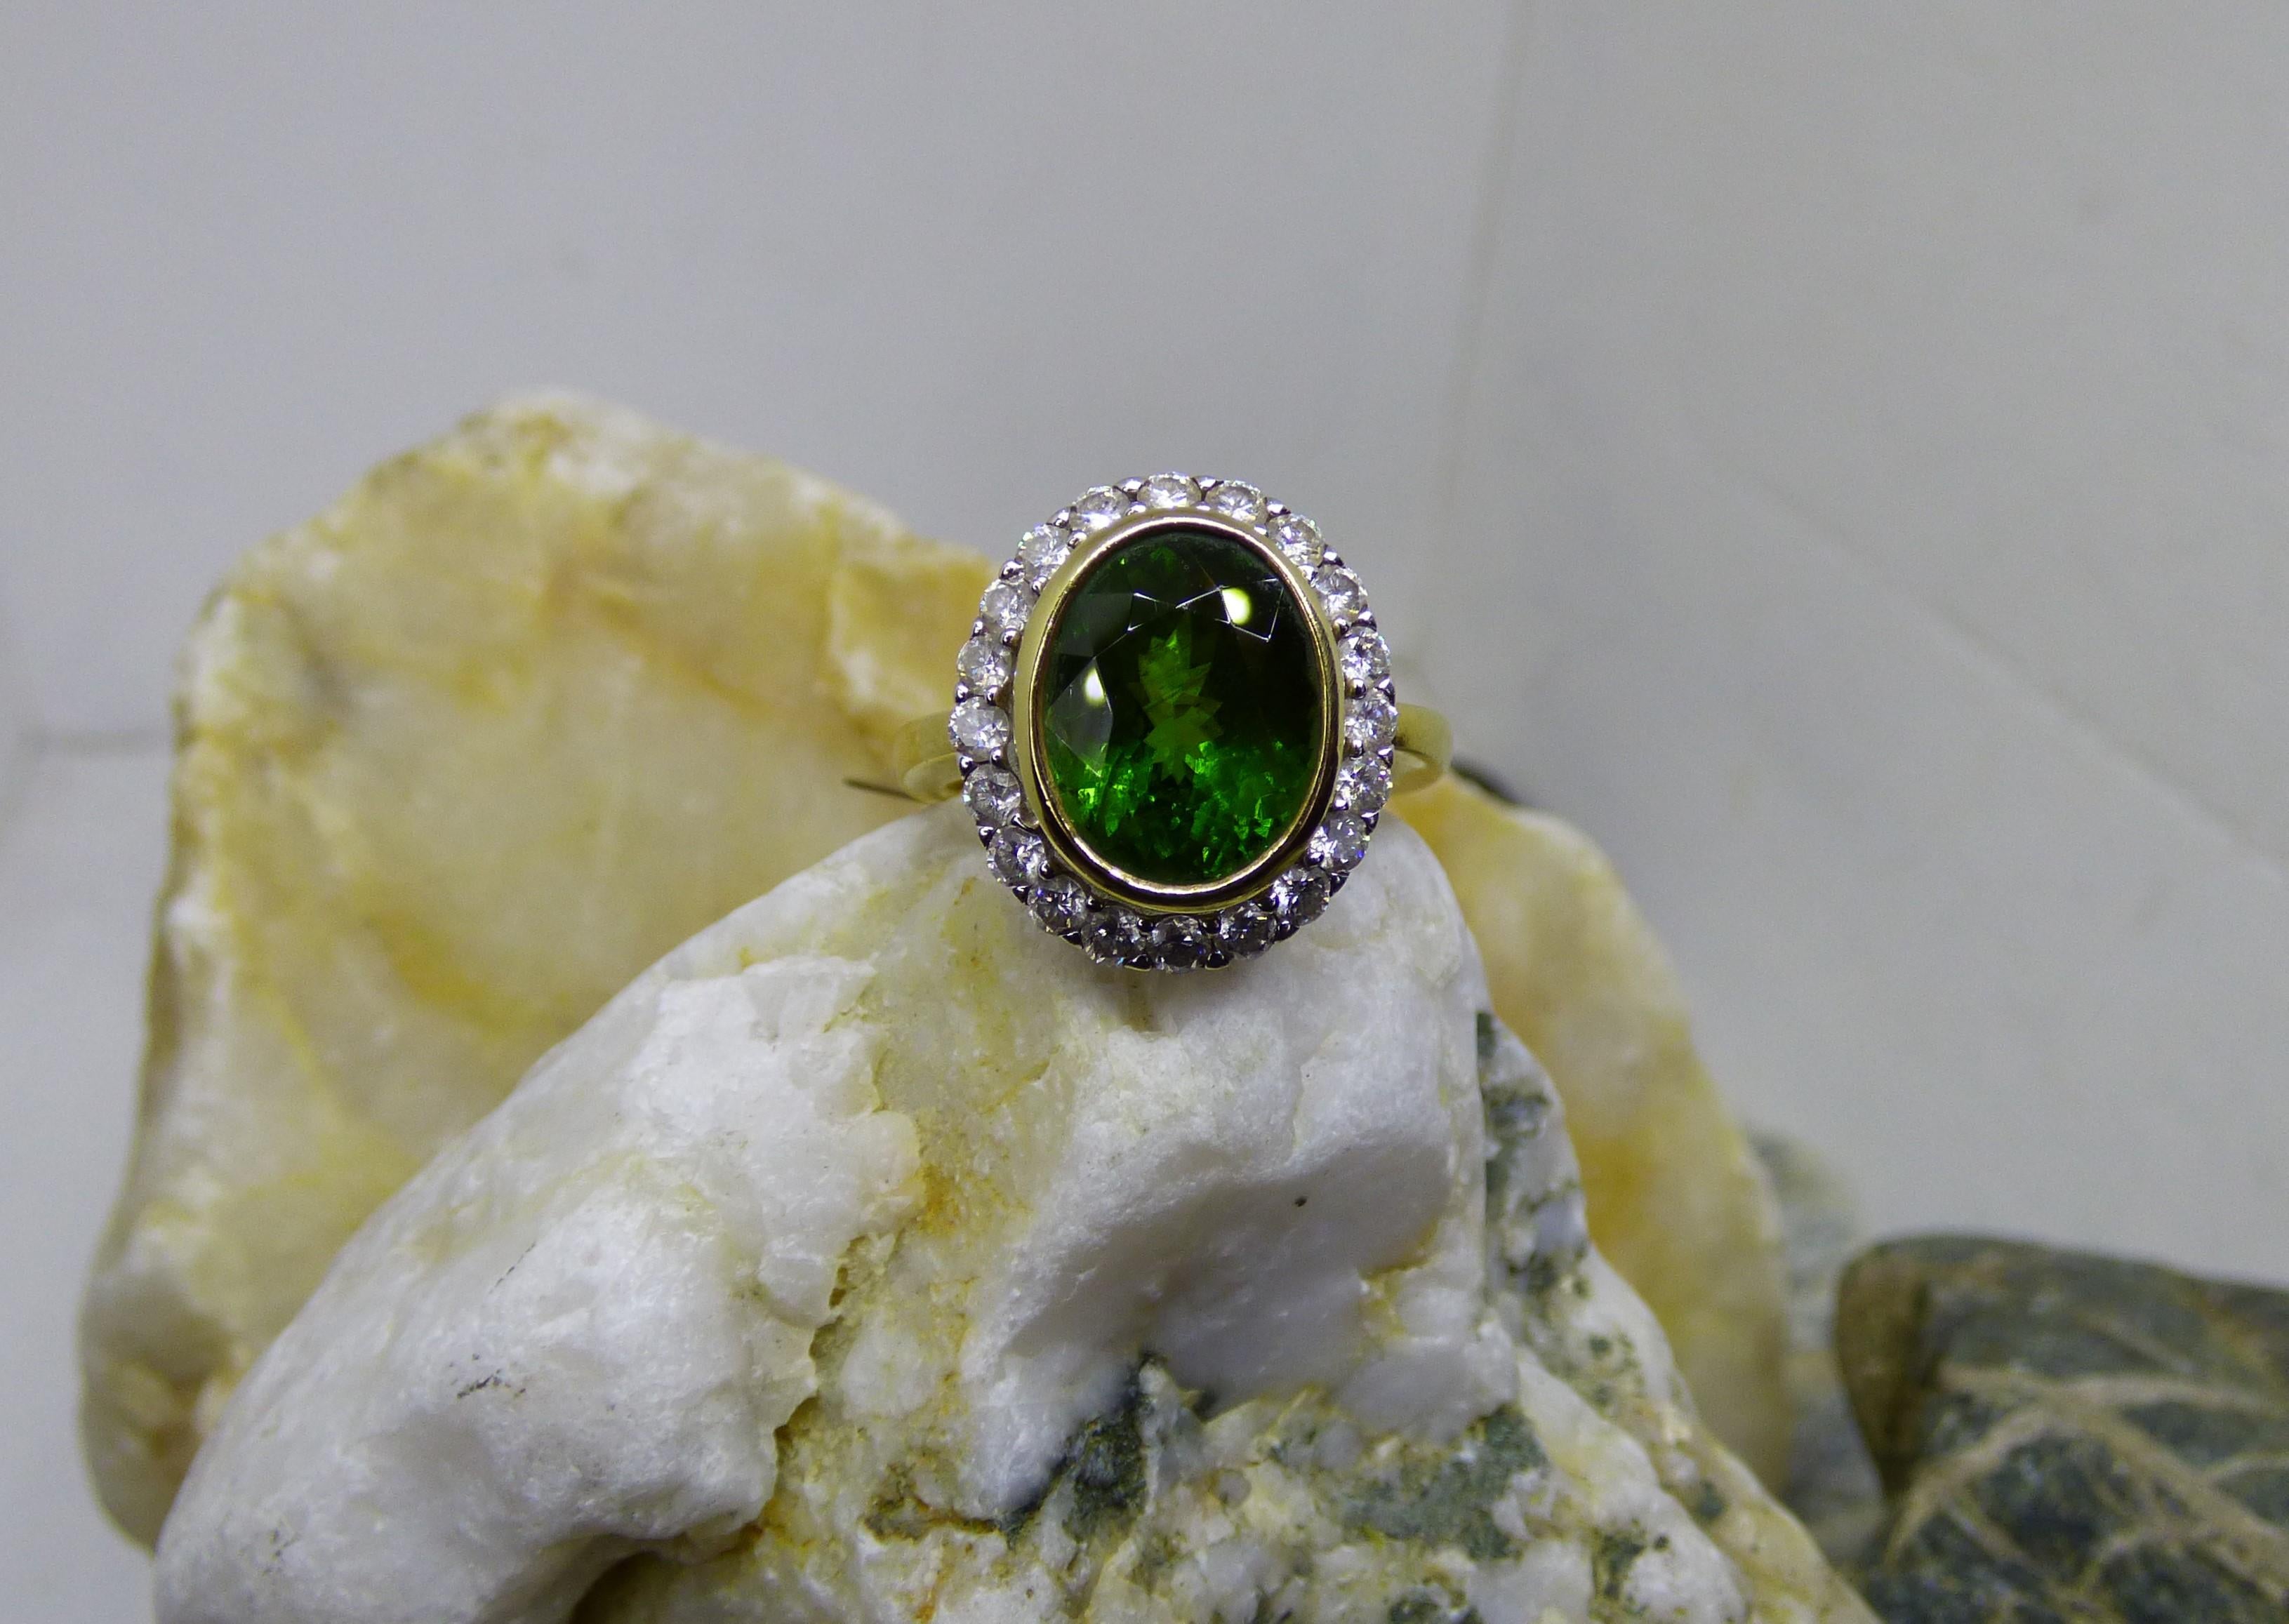 A green Tourmaline that shines bright and colourful.  The faceted oval Tourmaline is 5.77ct . The Tourmaline is surrounded by 20 Diamonds with a total Diamond weight of .85ct.  The ring is handmade in 18K yellow gold with the Diamonds set in 18K